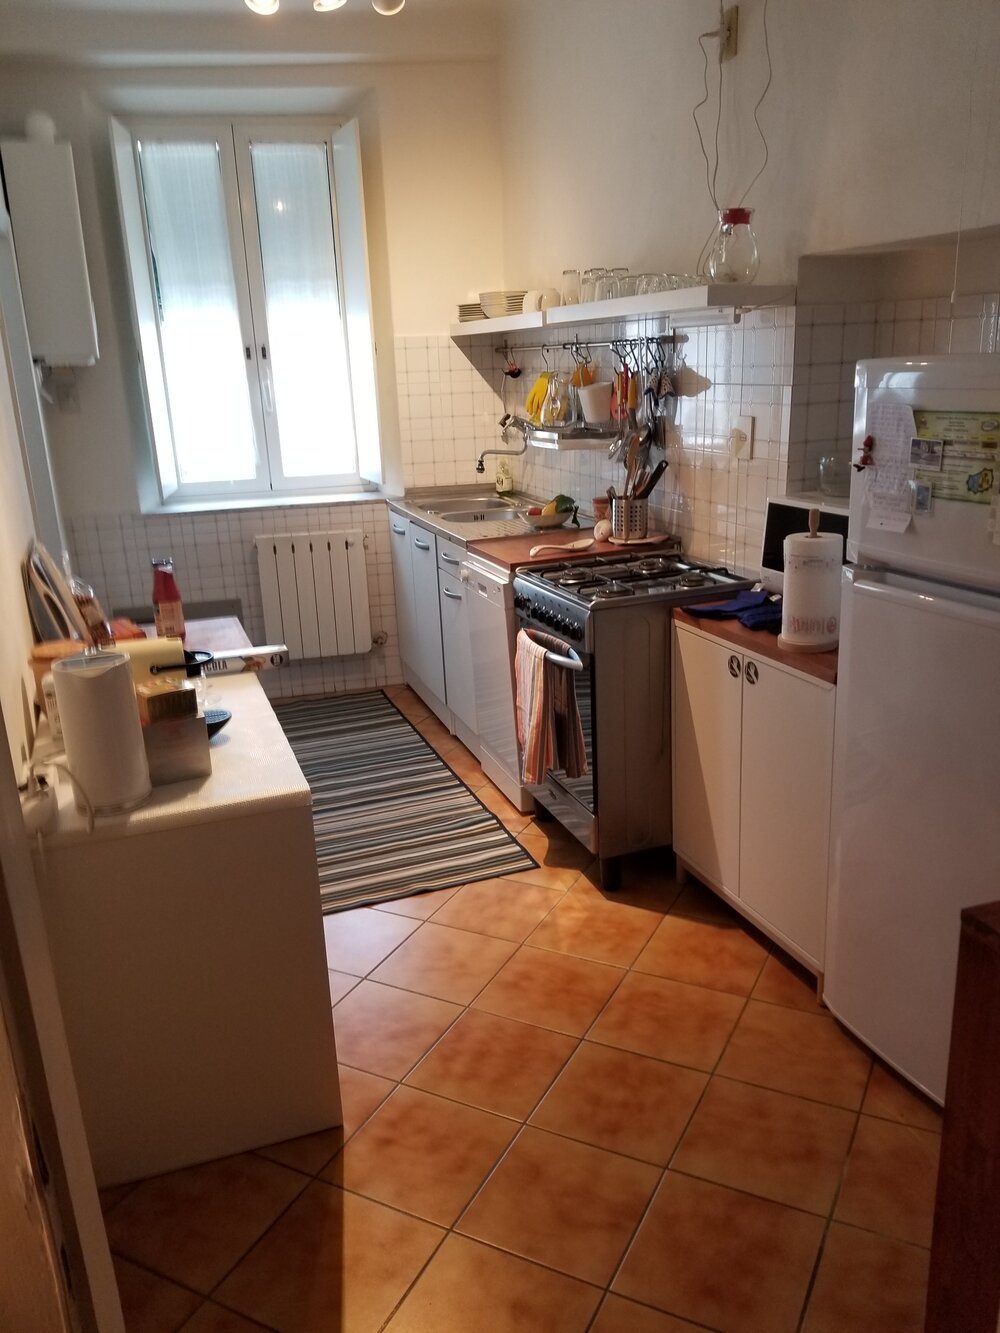 my little kitchen during my last stay in beautiful Lucca